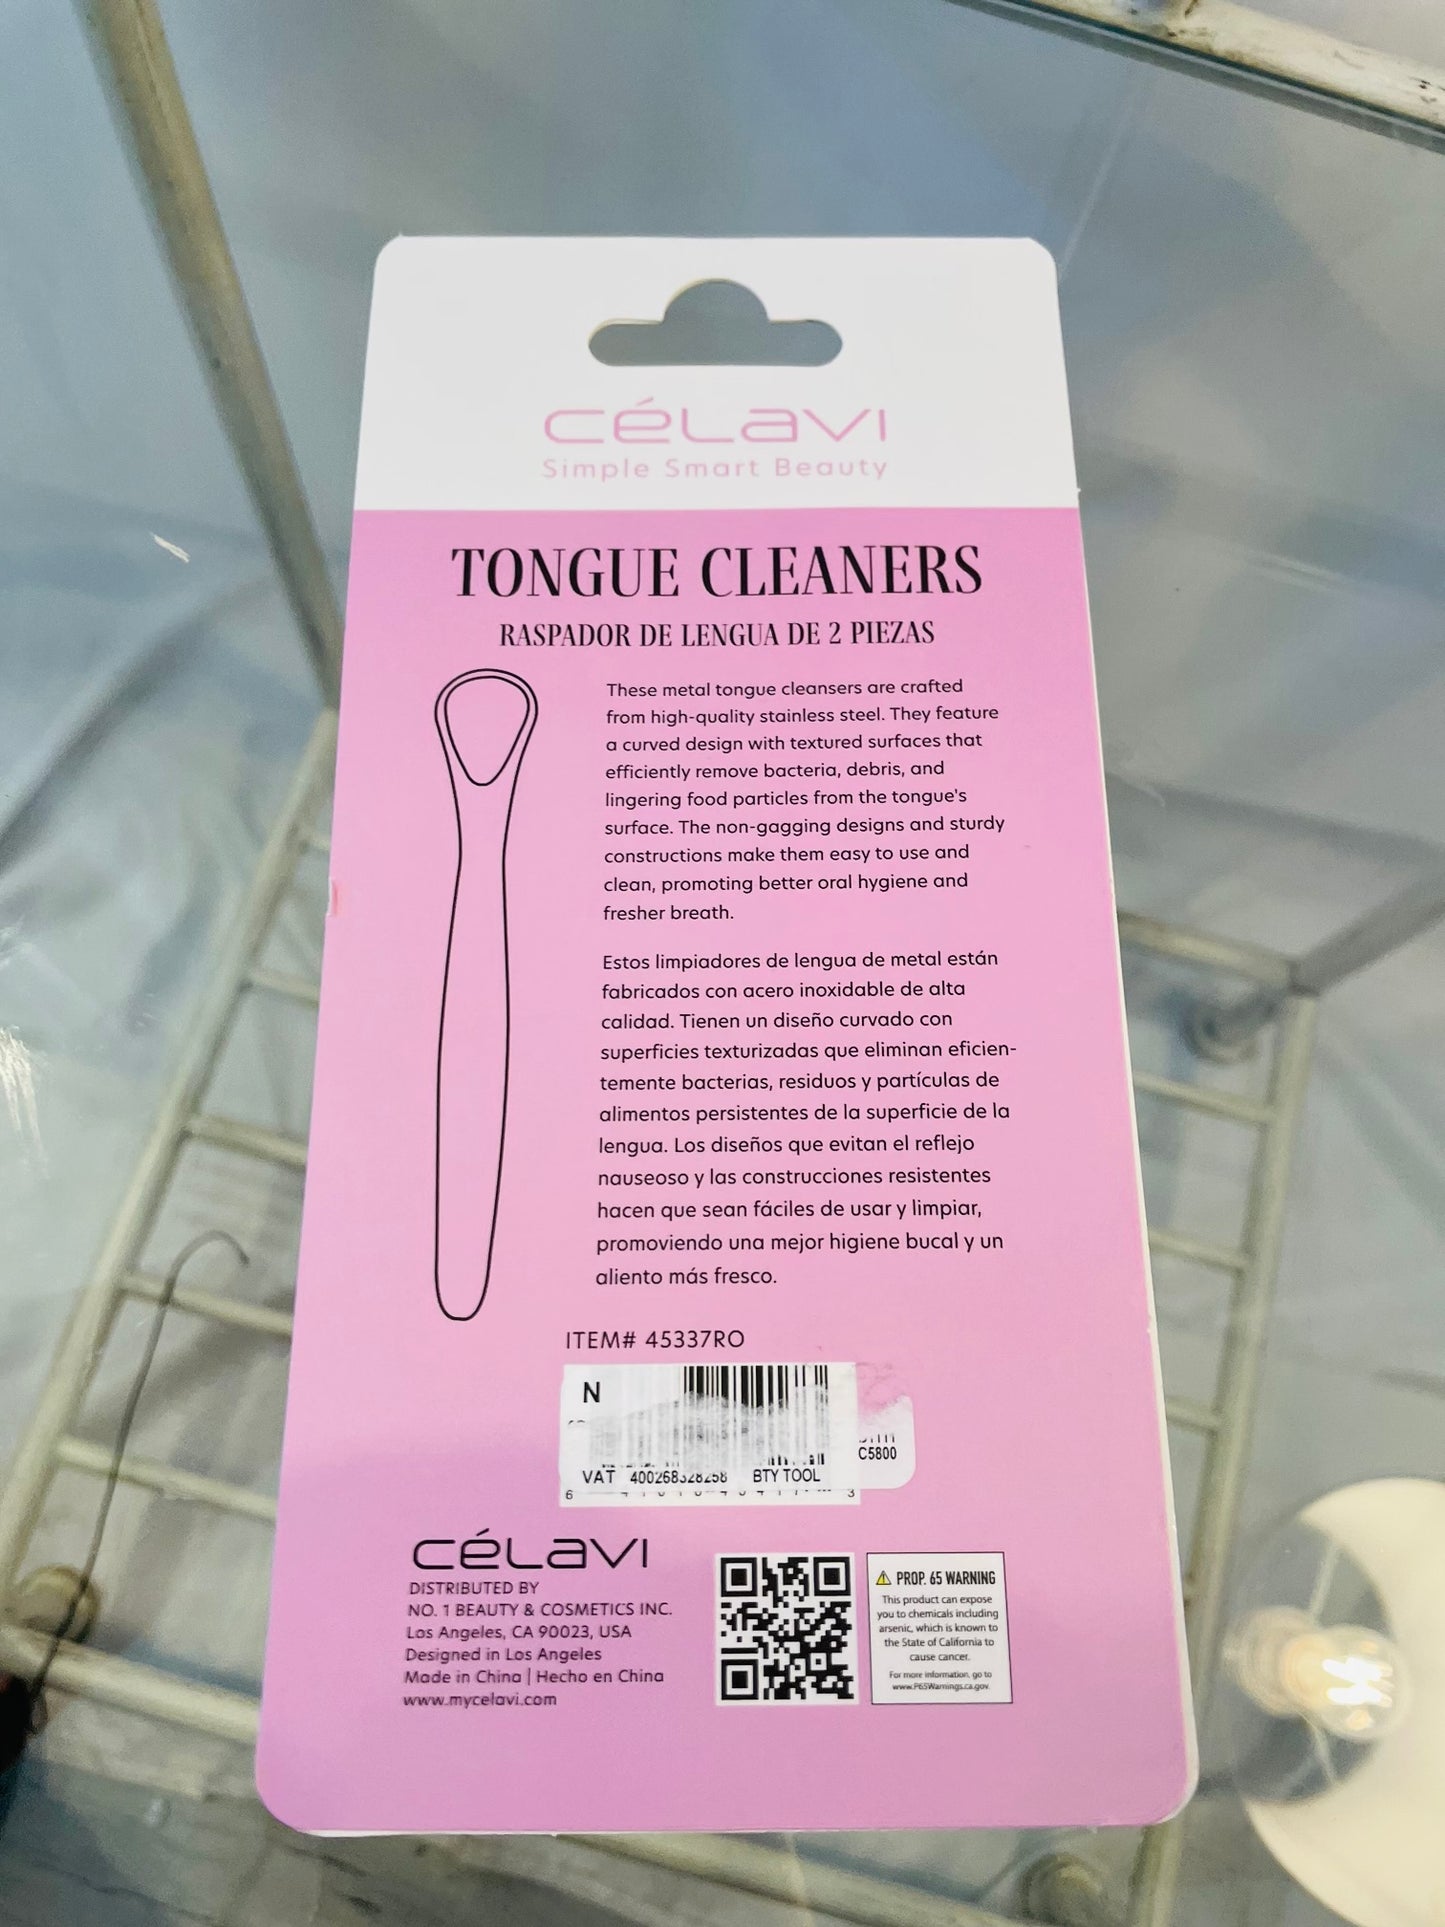 Tongue cleaners